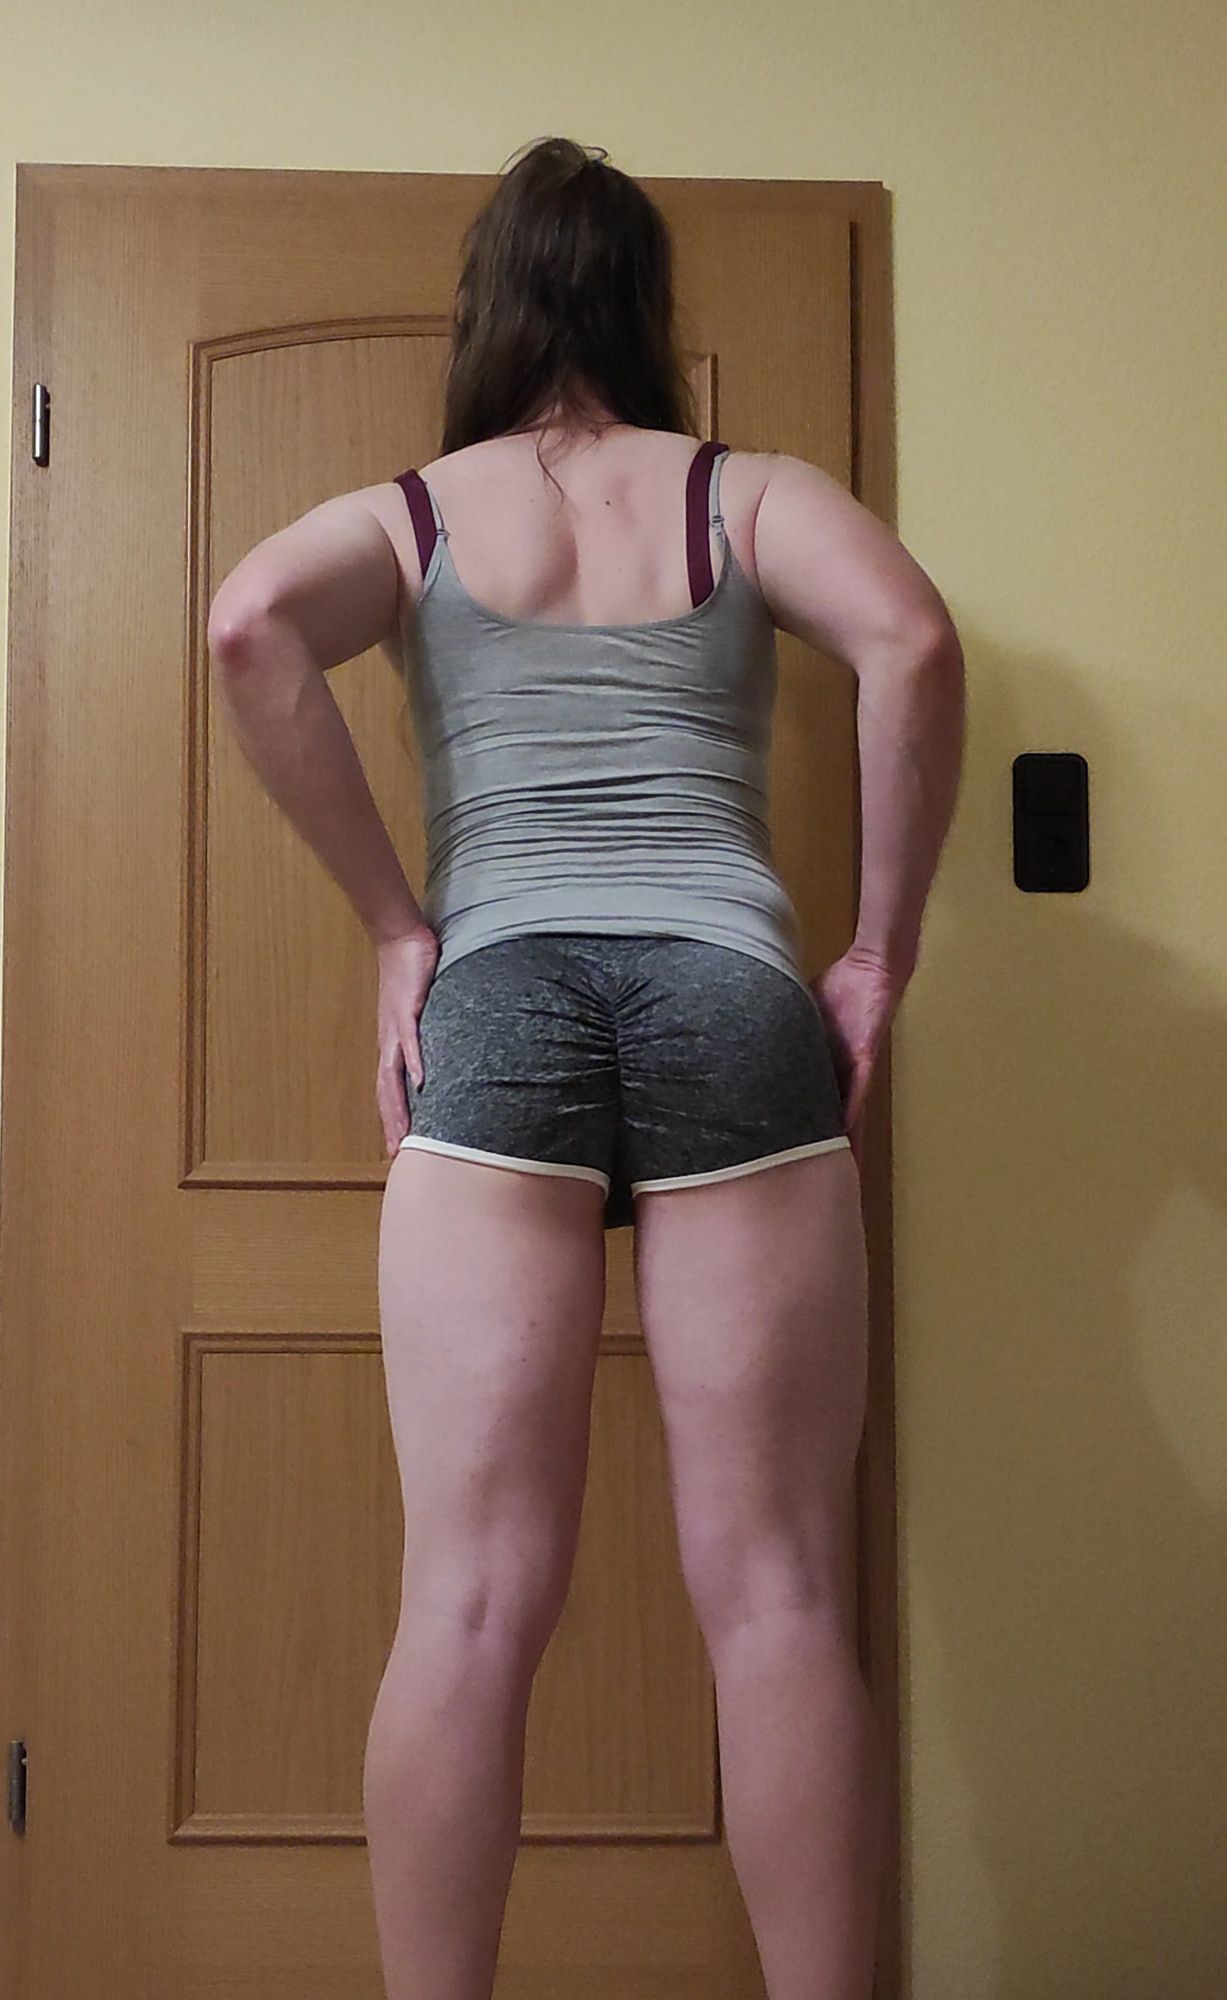 horny after workout #4